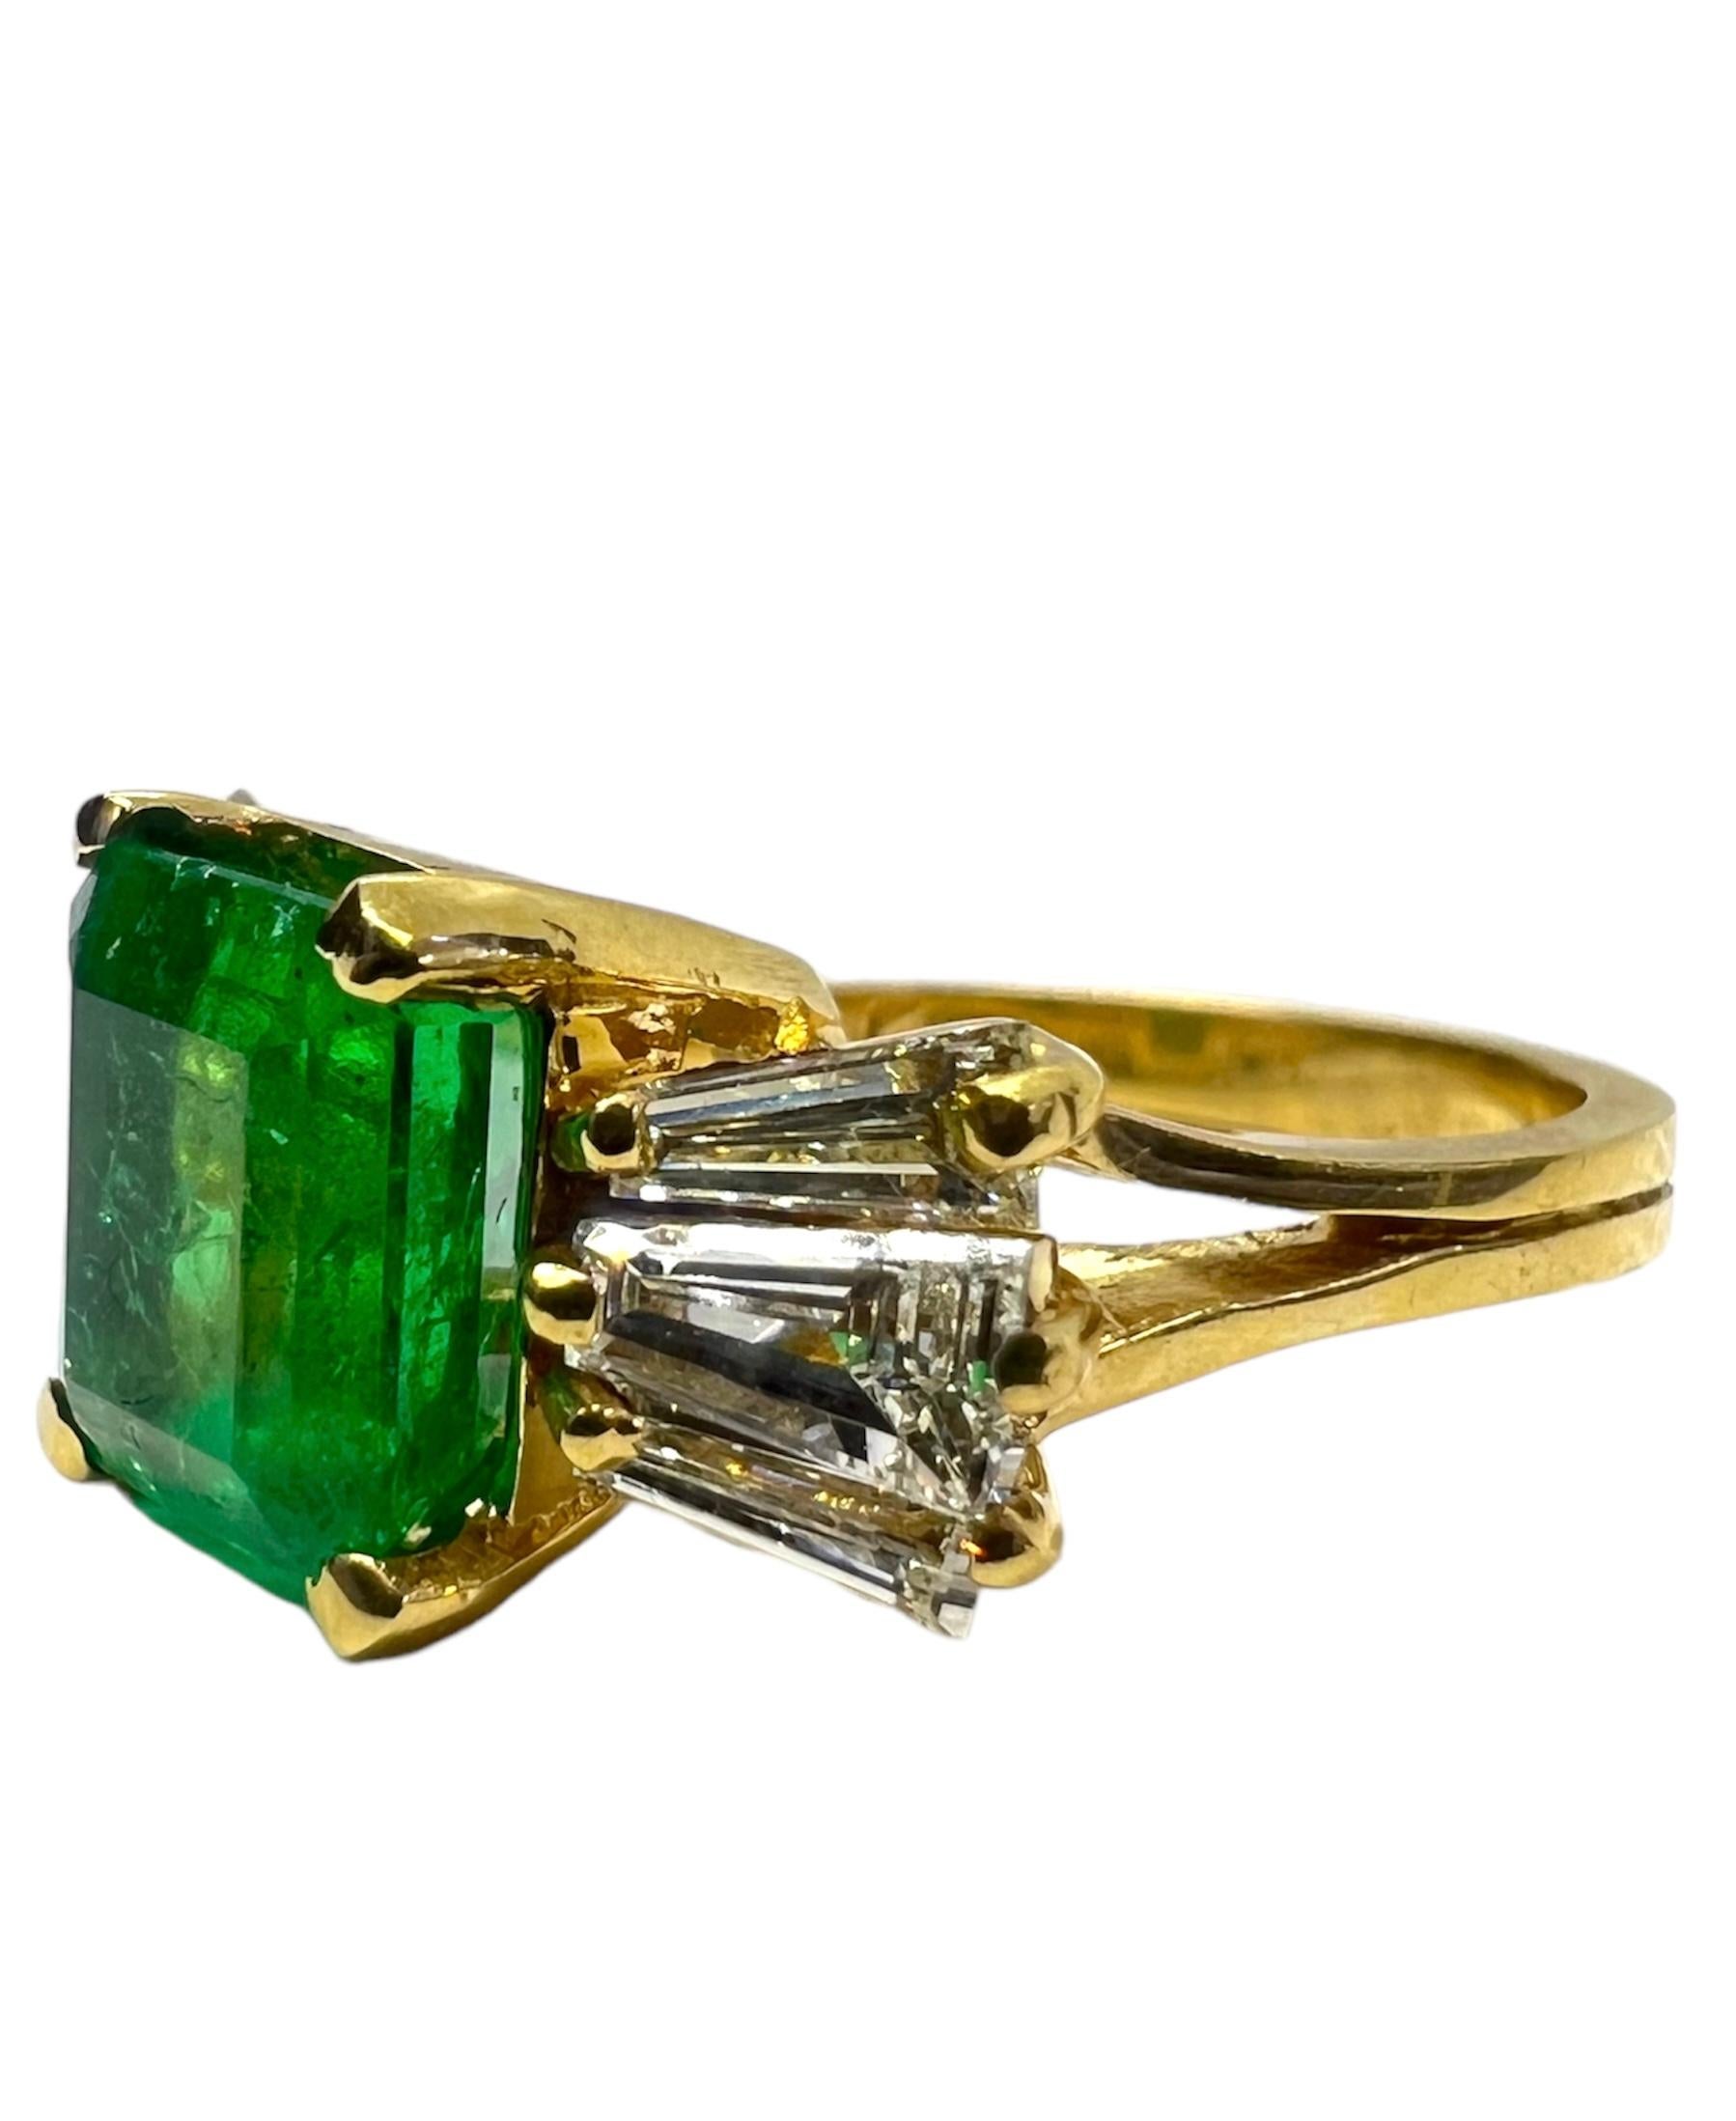 14K yellow gold ring with emerald and diamond.

Sophia D by Joseph Dardashti LTD has been known worldwide for 35 years and are inspired by classic Art Deco design that merges with modern manufacturing techniques.